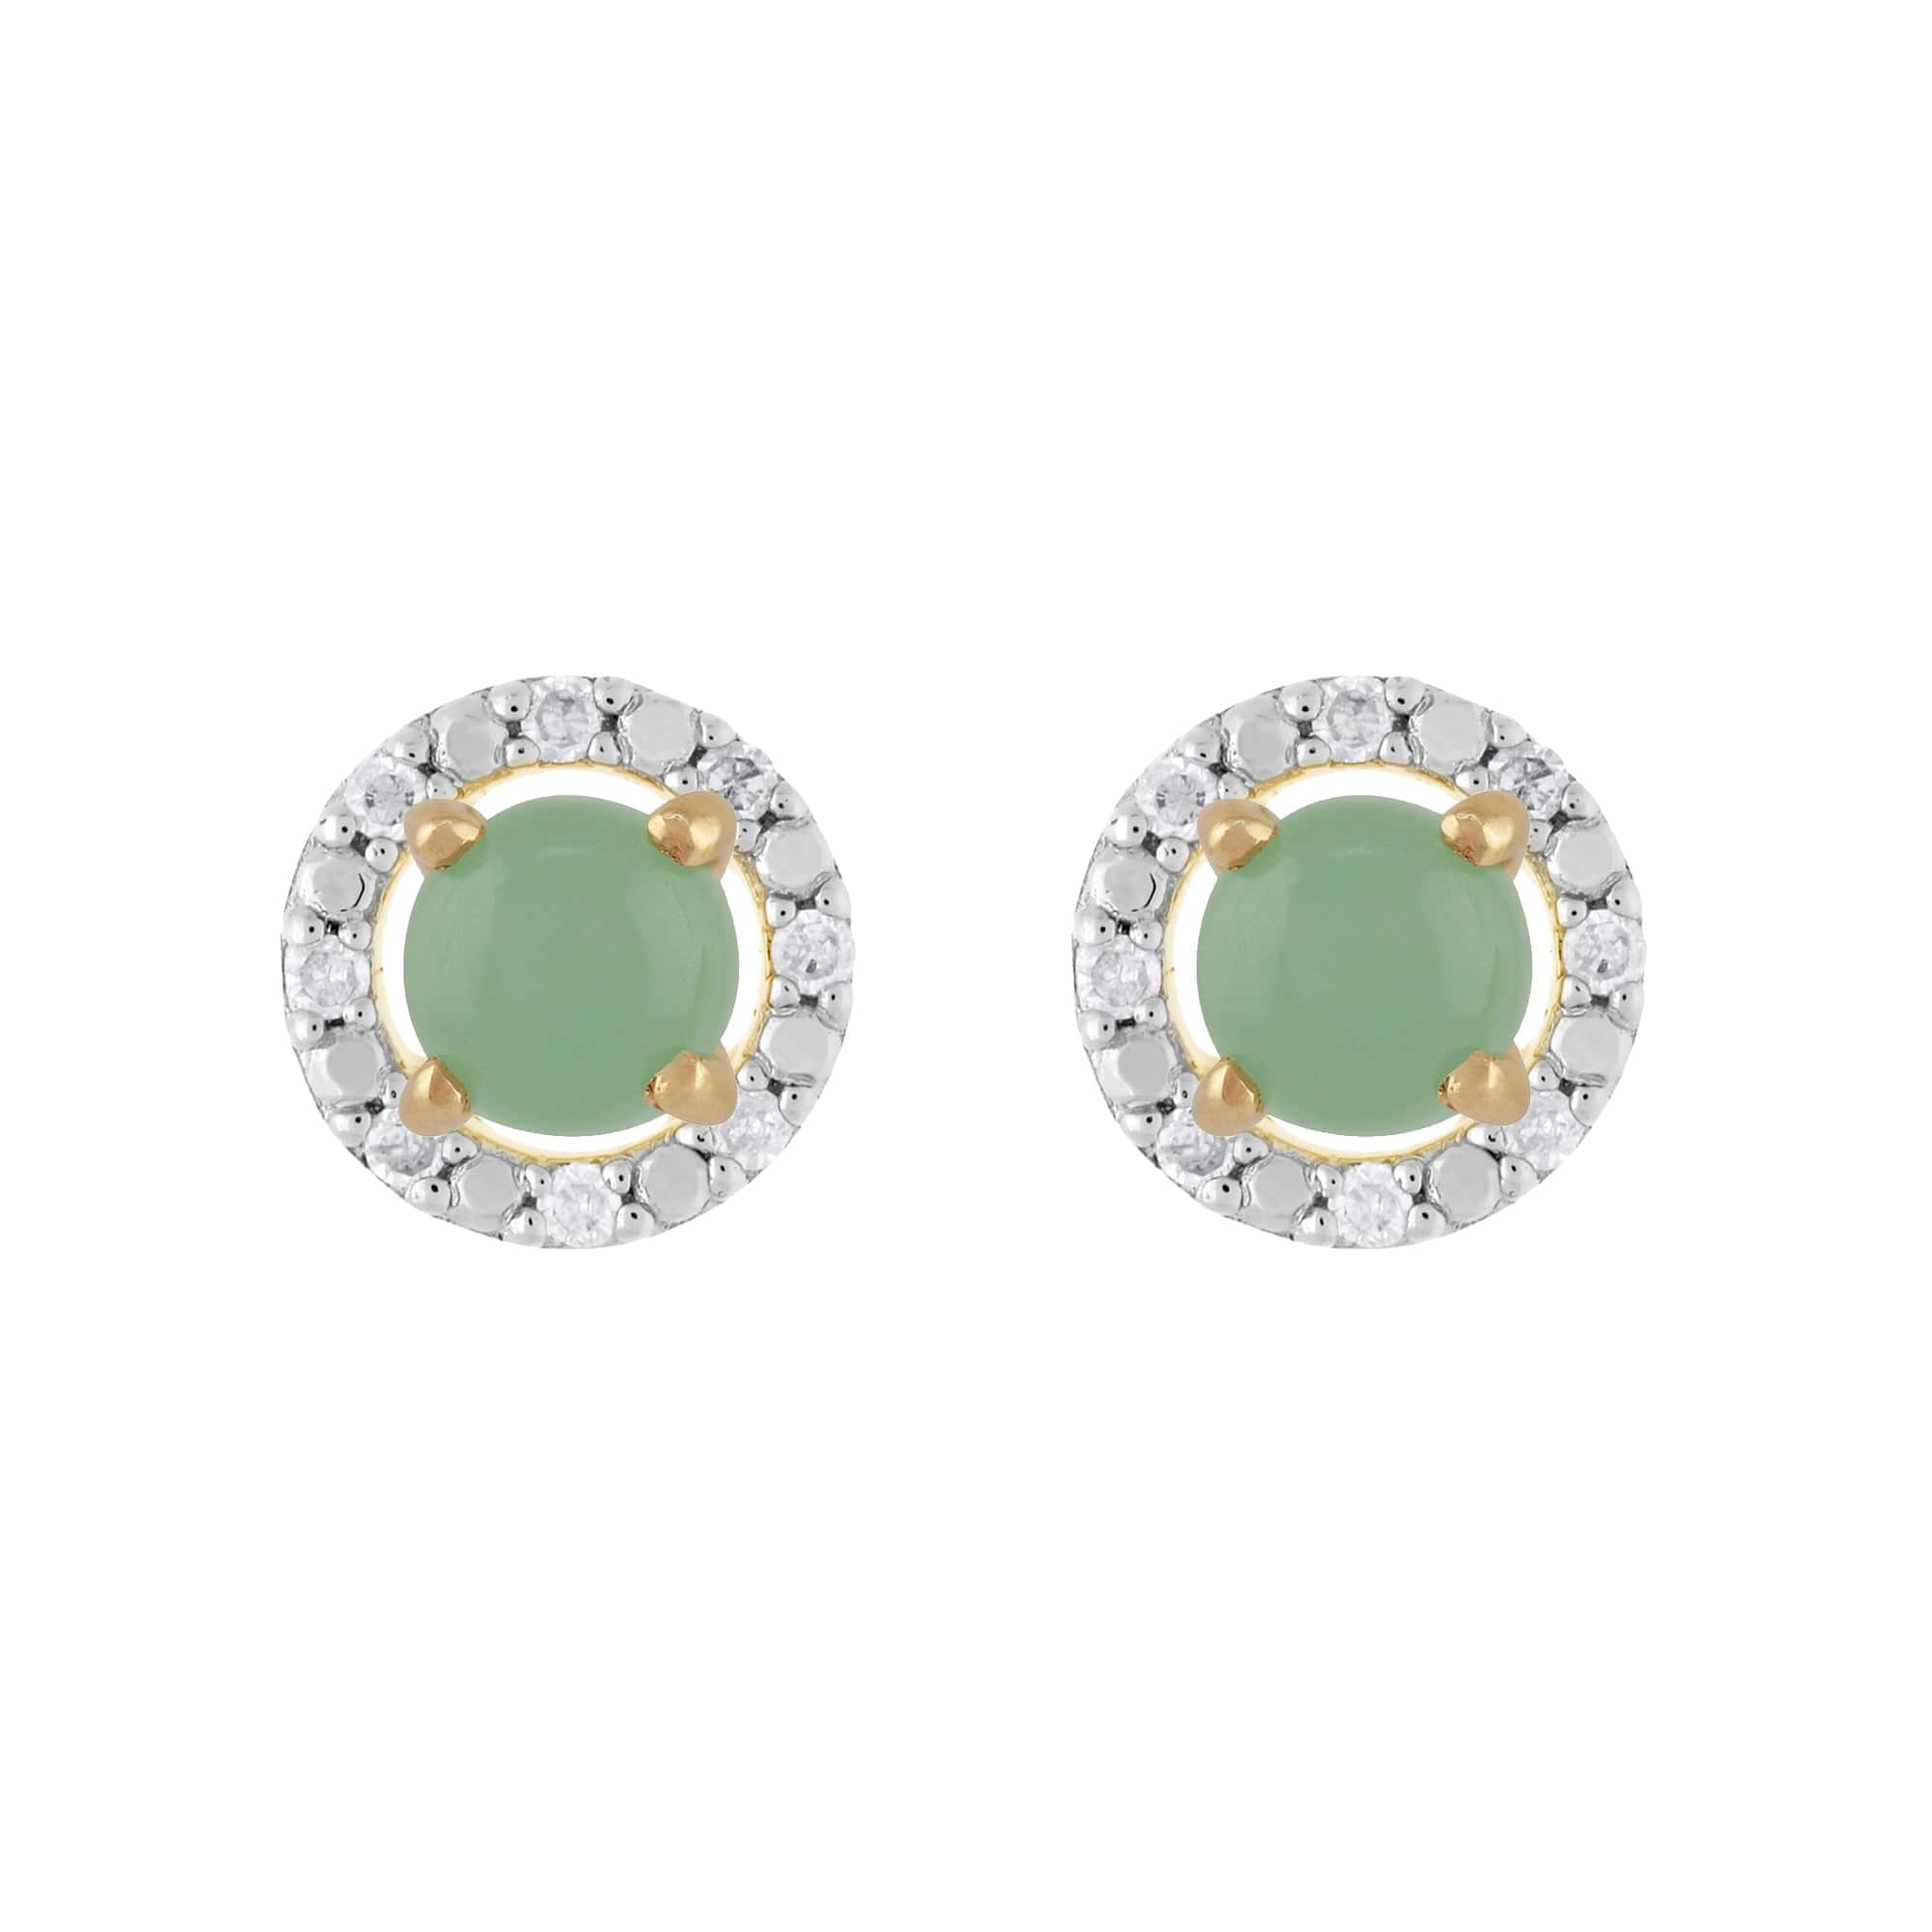 26943-191E0376019 Classic Round Jade Stud Earrings with Detachable Diamond Round Earrings Jacket Set in 9ct Yellow Gold 1